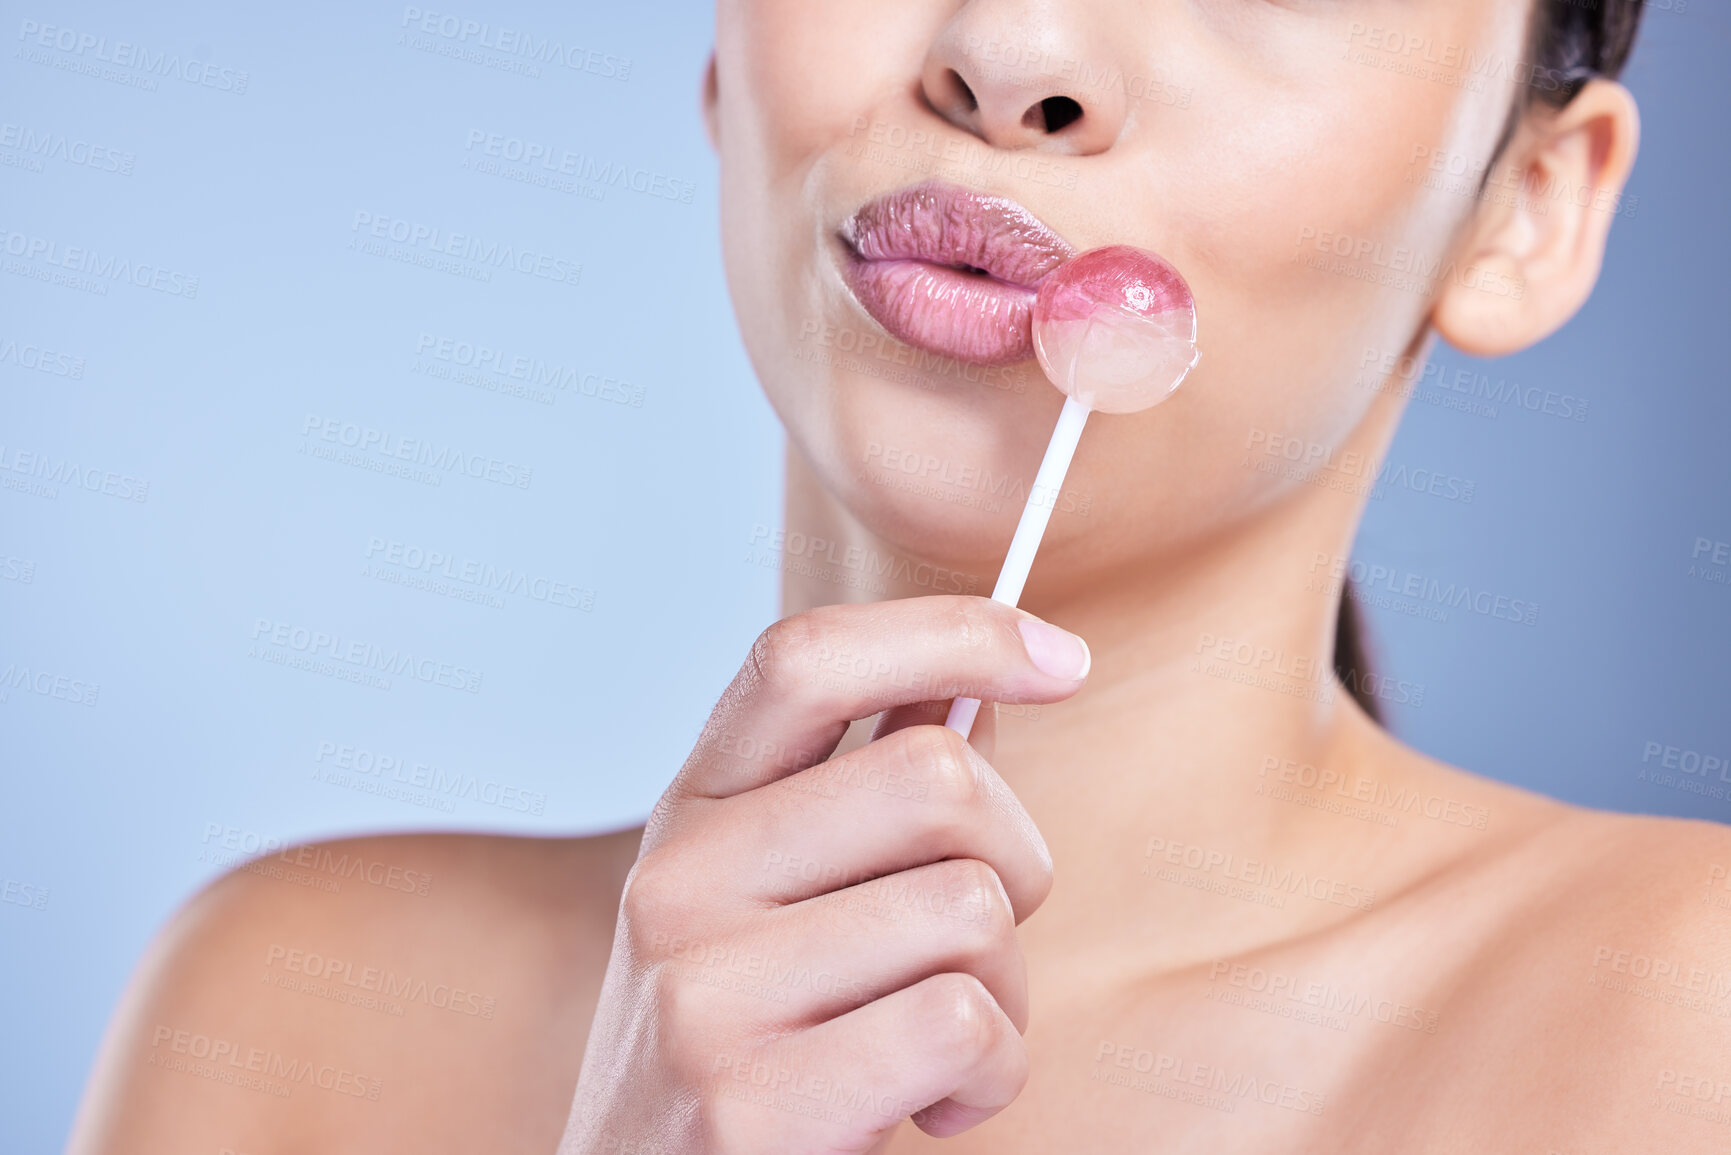 Buy stock photo Closeup of a a beautiful mixed race model playfully licking a lollipop in studio against a blue background copyspace